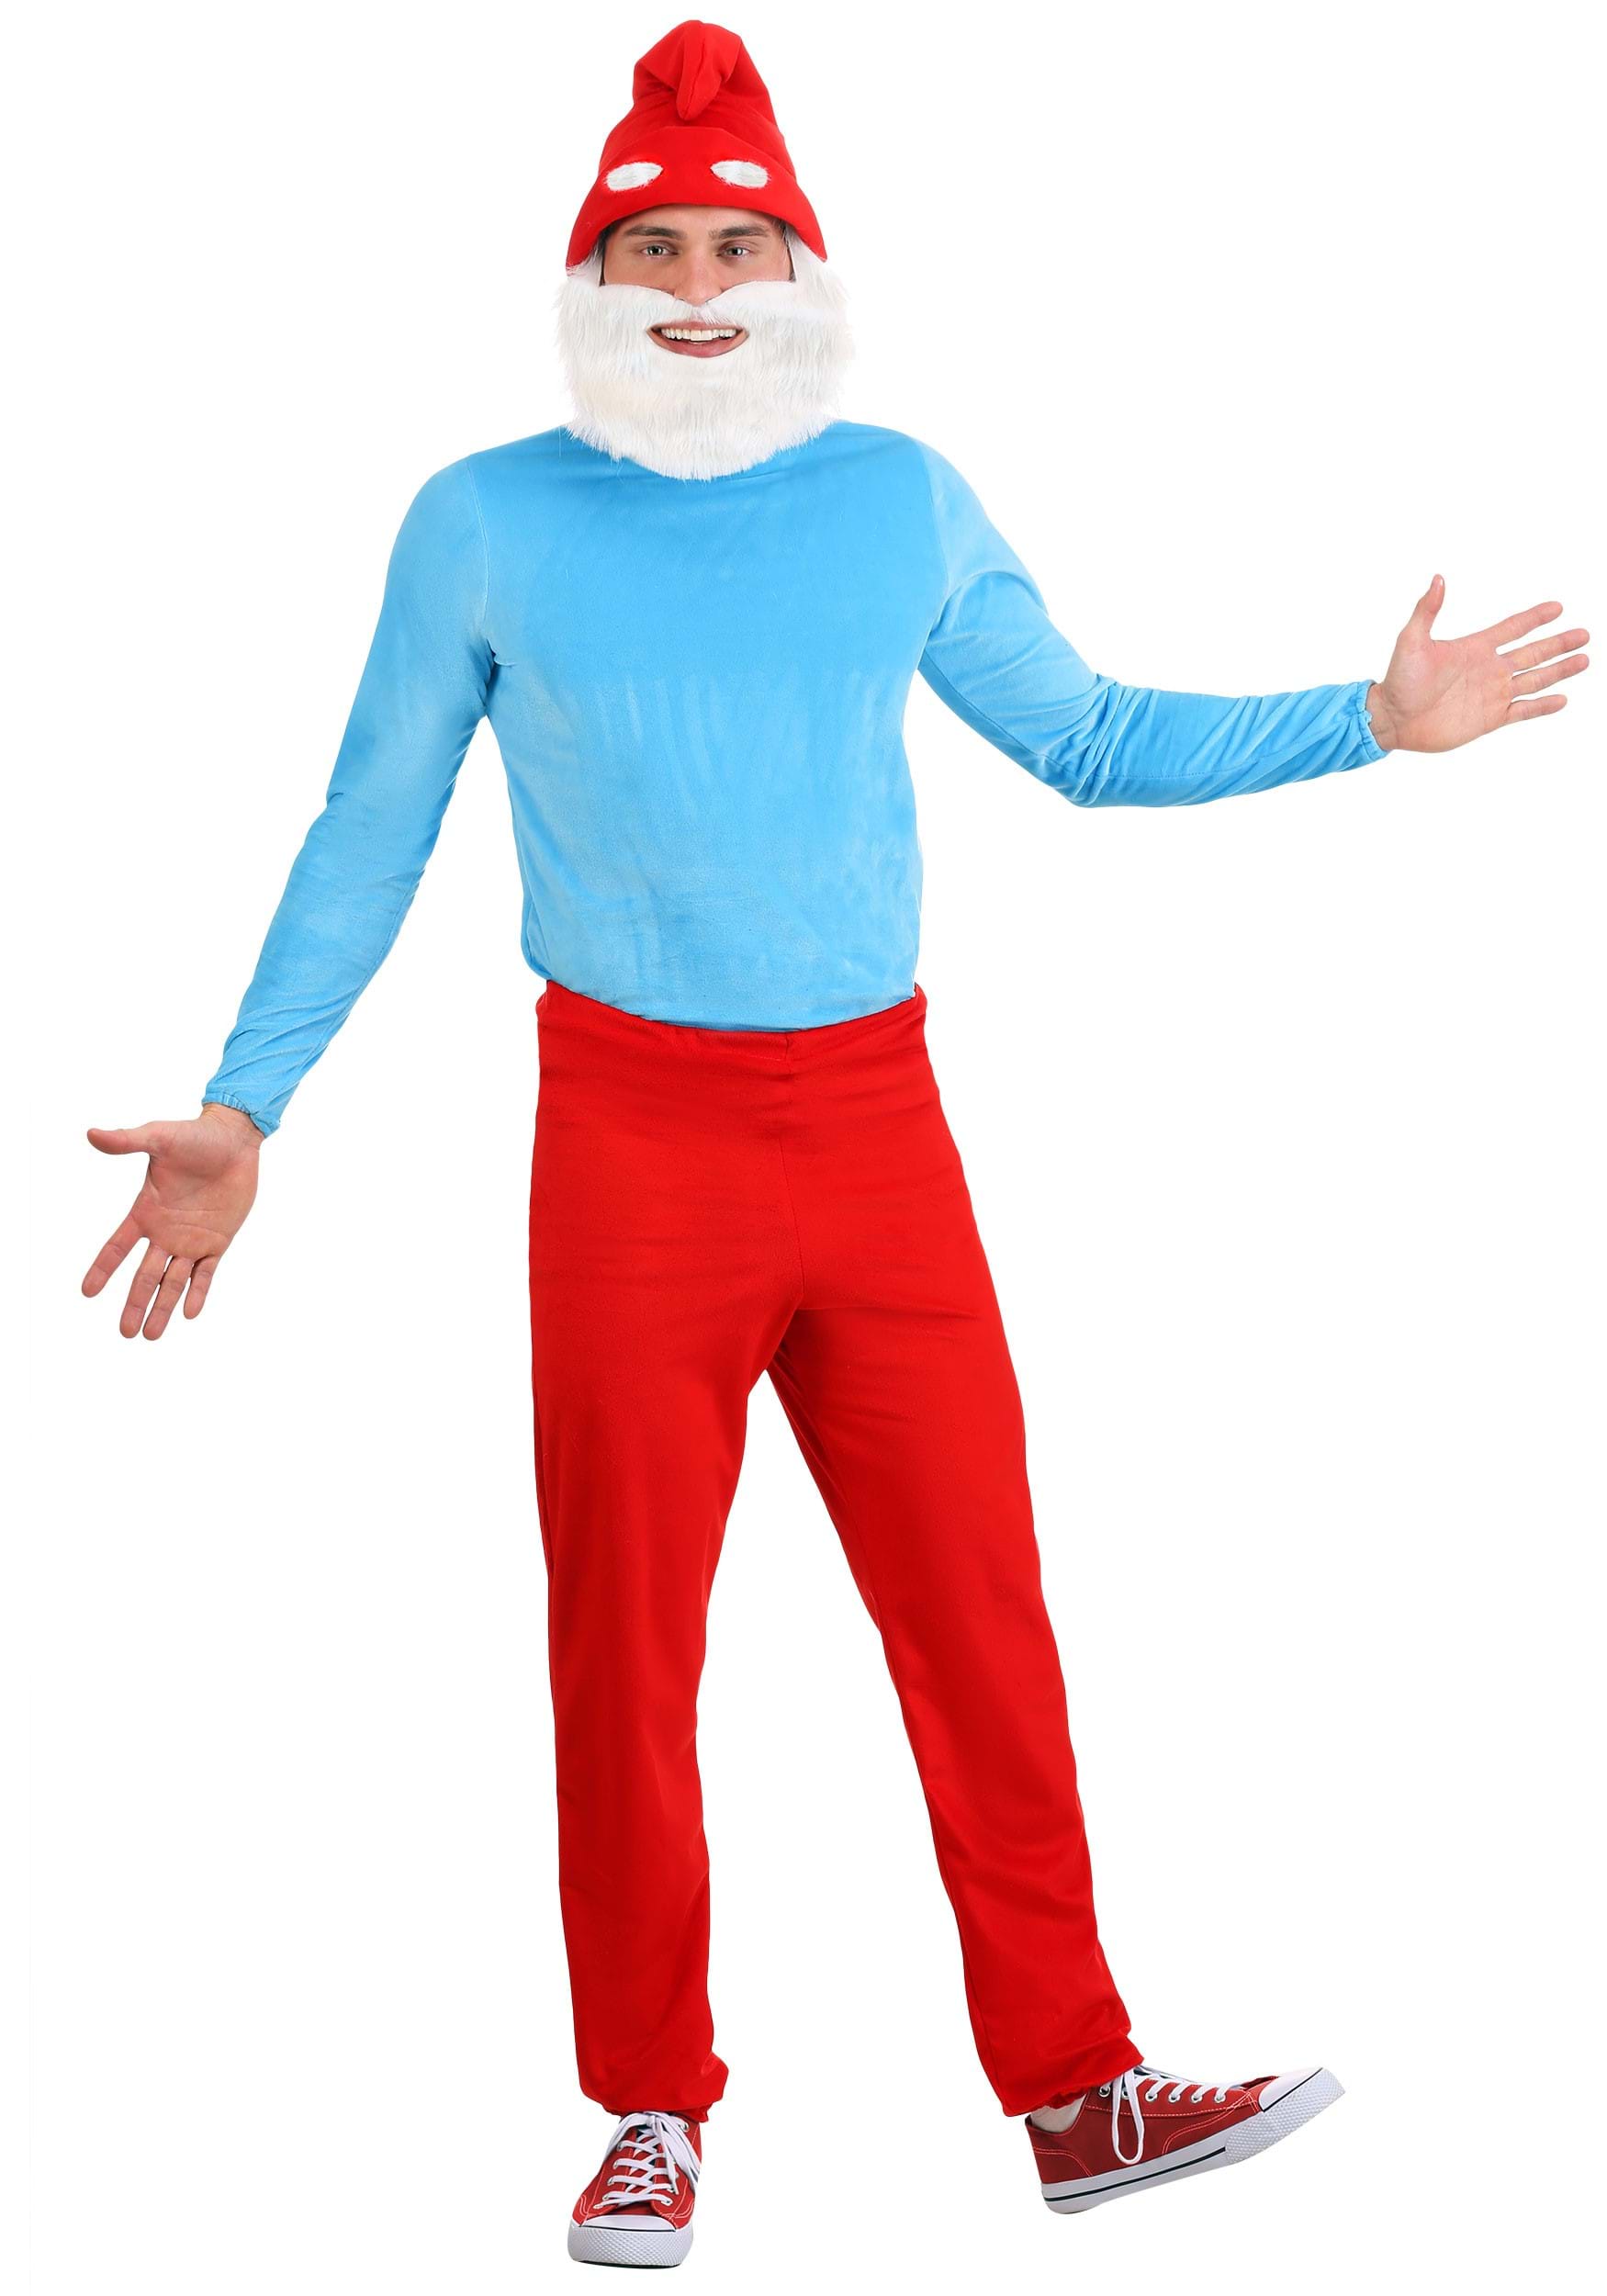 Photos - Fancy Dress FUN Costumes Plus Size The Smurfs Adult Papa Smurf Costume Red/Blue FU